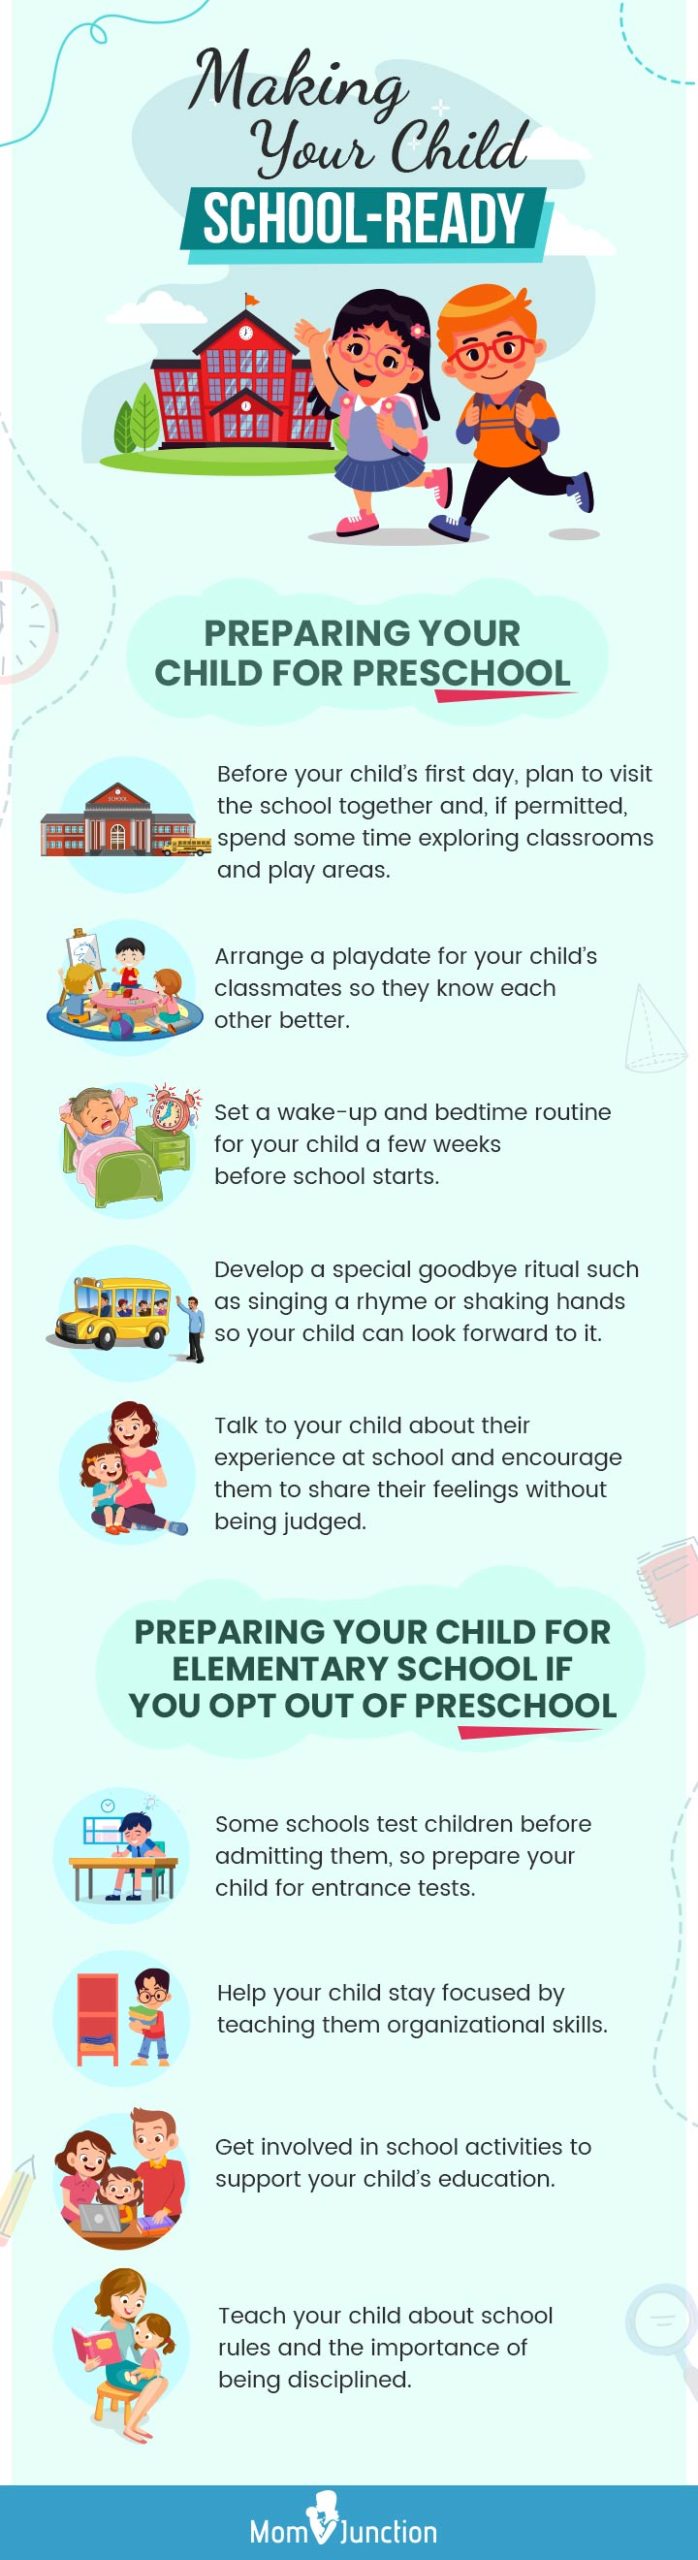 making your child school ready (infographic)